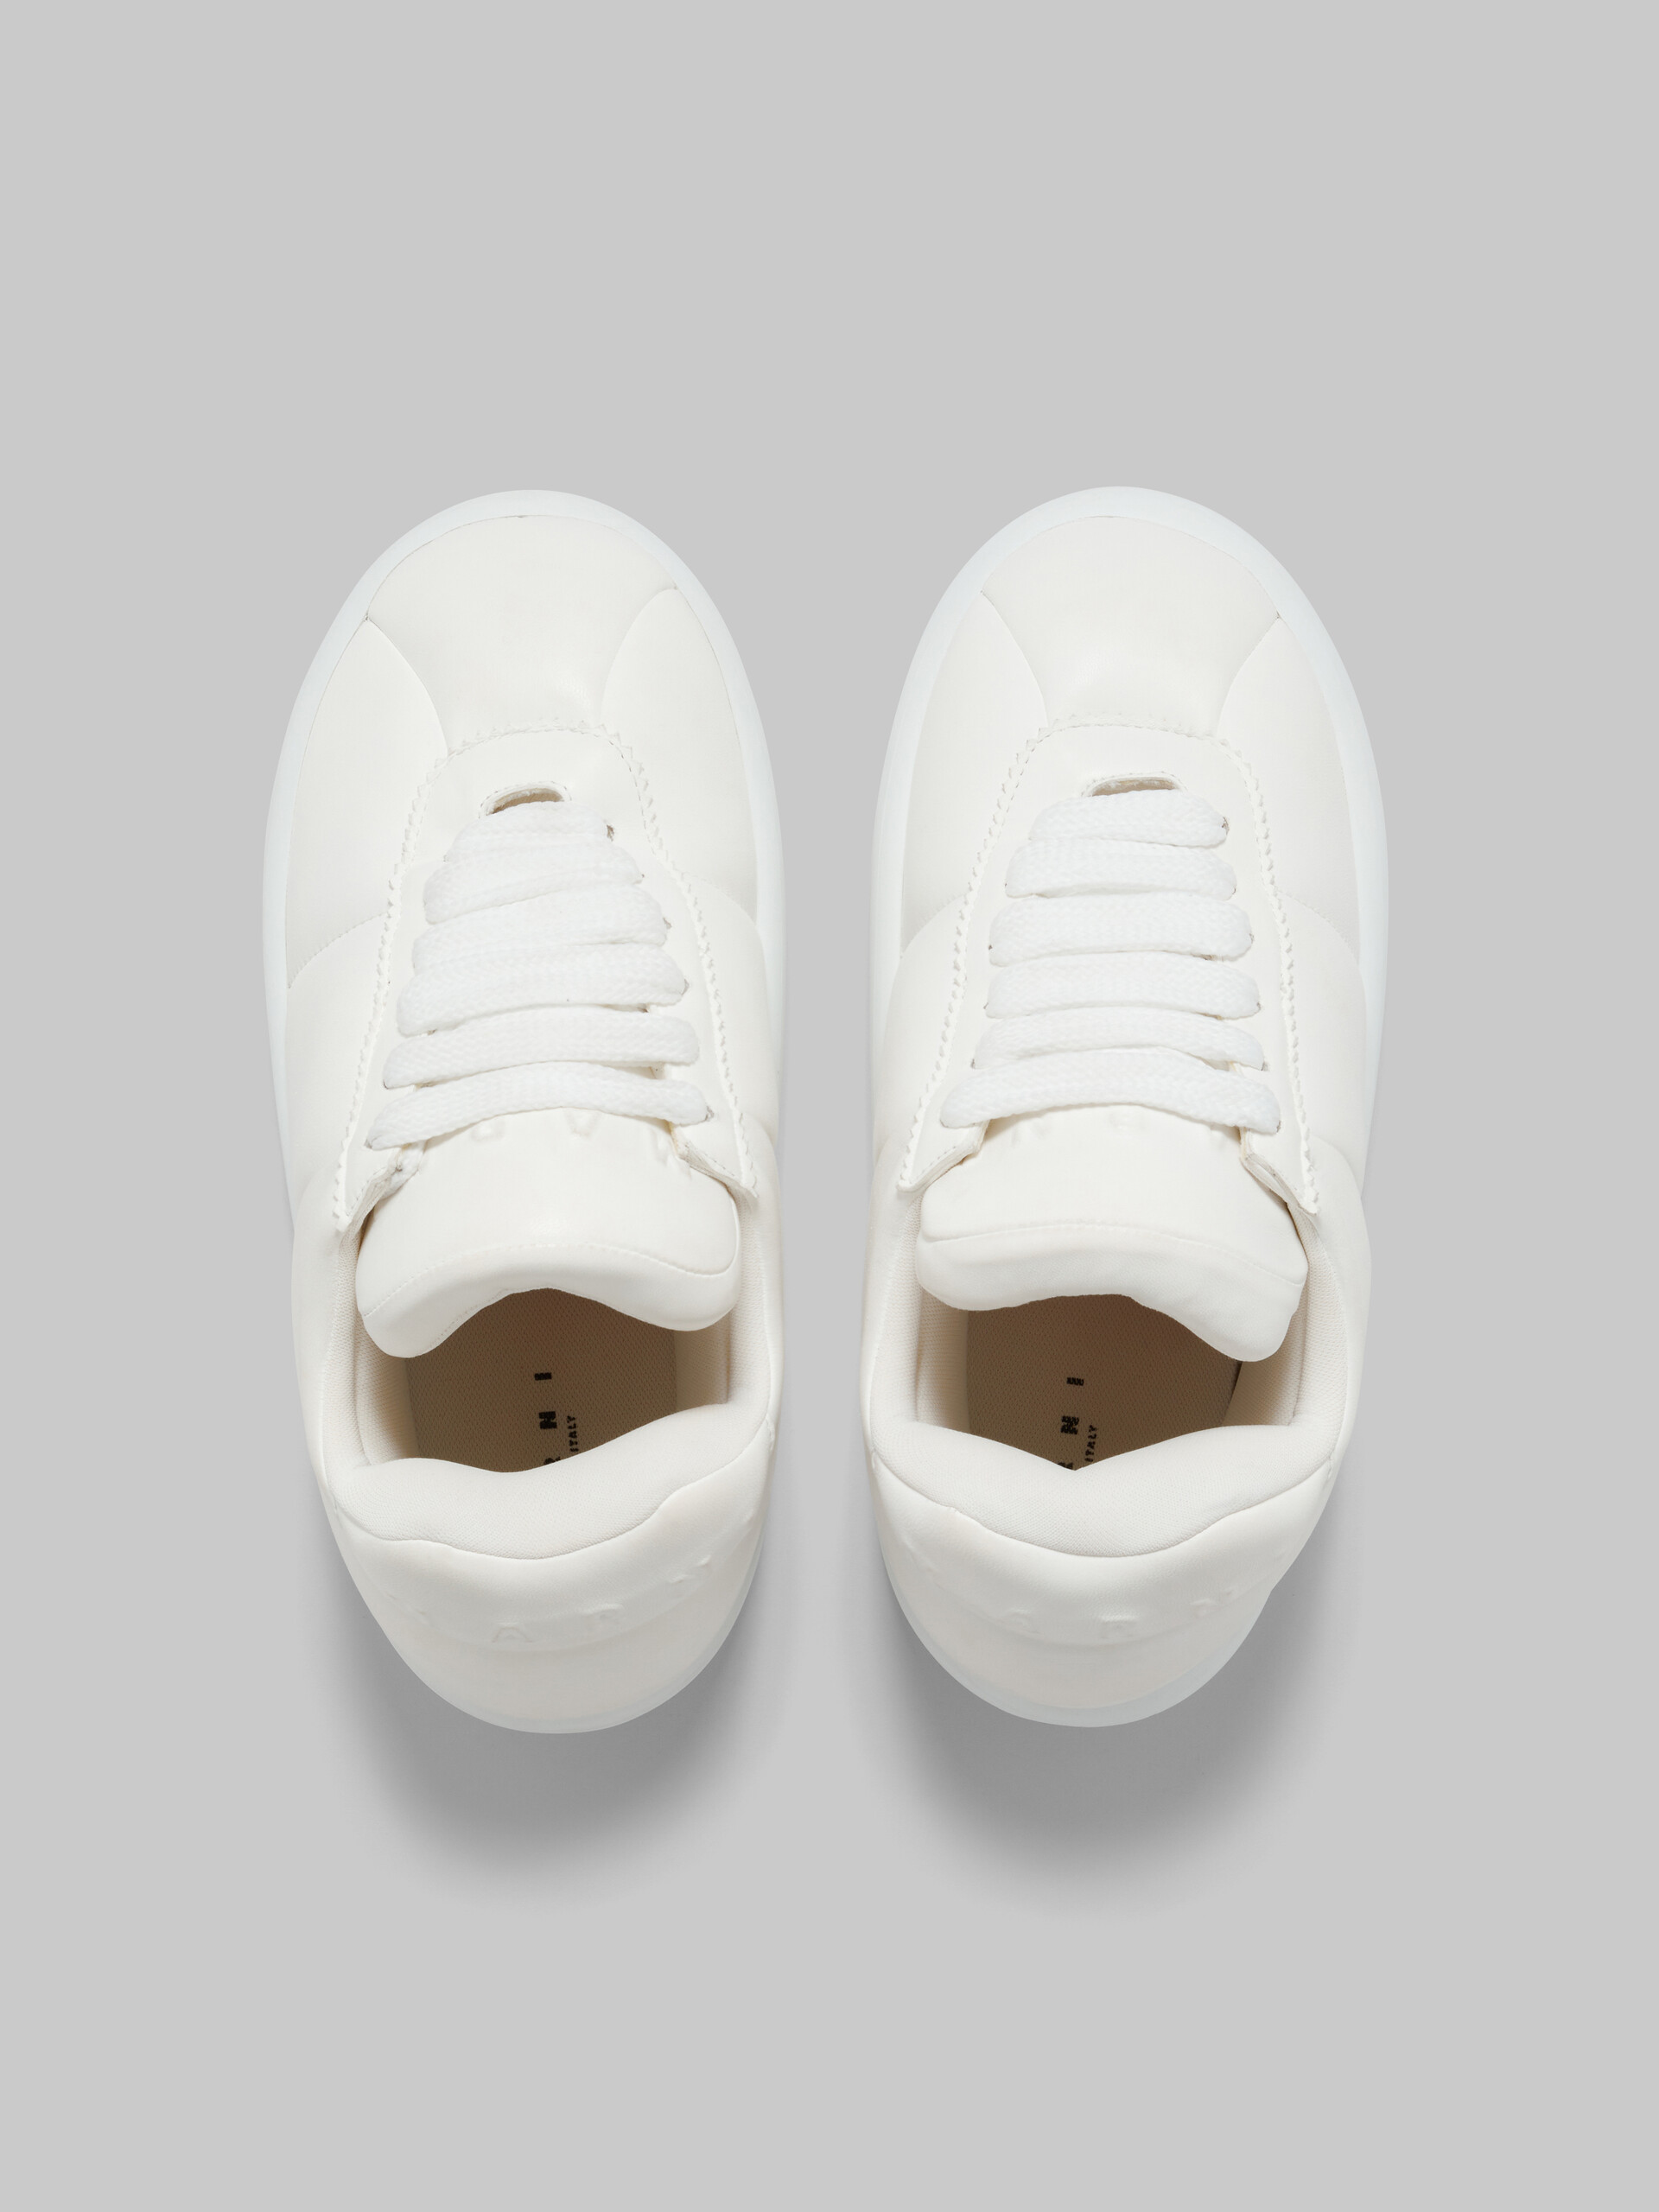 White leather BigFoot 2.0 sneaker - Sneakers - Image 4